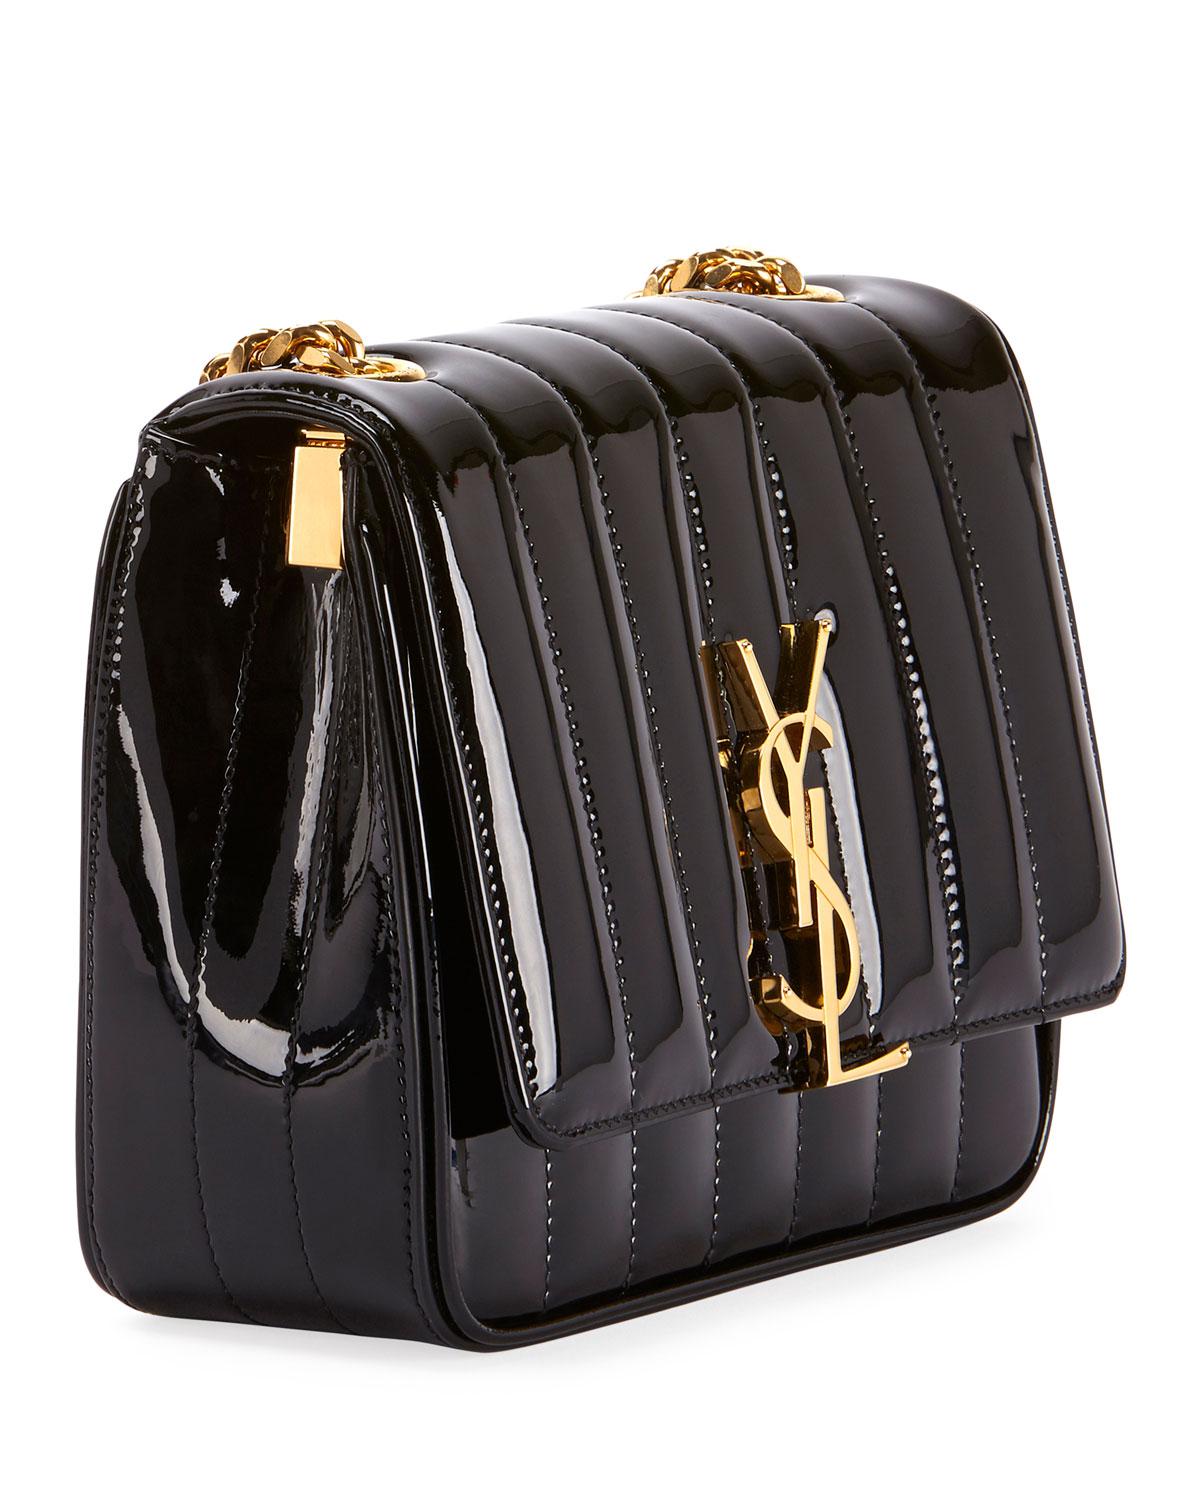 Saint Laurent Vicky Monogram Ysl Small Quilted Patent Leather Crossbody Bag in Black - Lyst